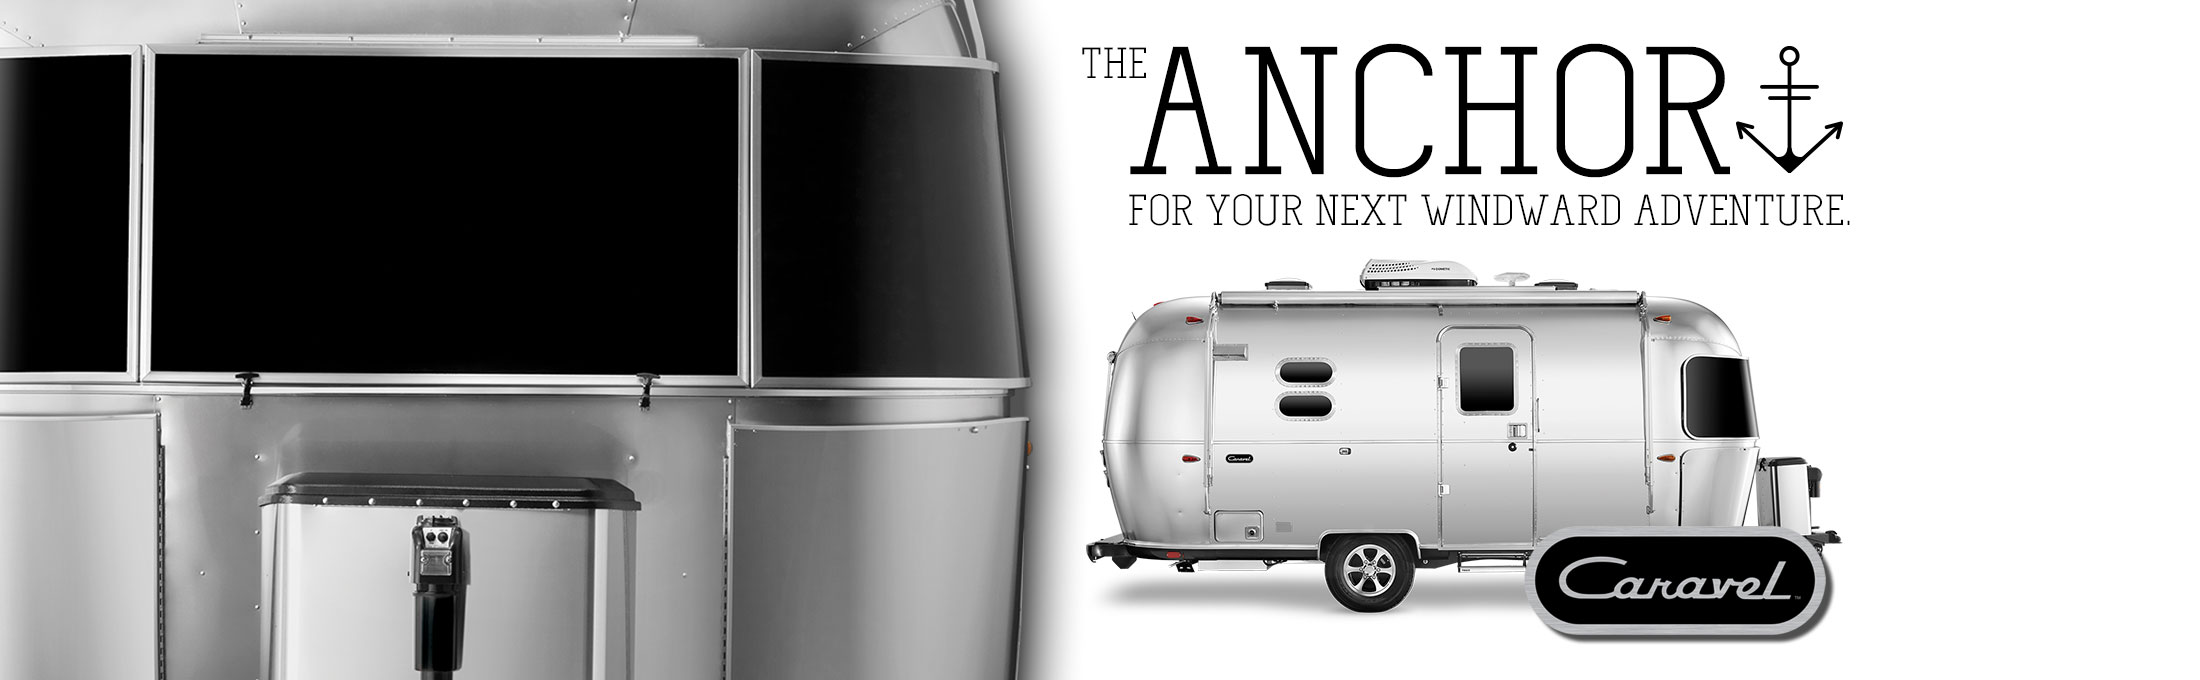 The Anchor For Your Next Windward Adventure: The 2021 Airstream Caravel.